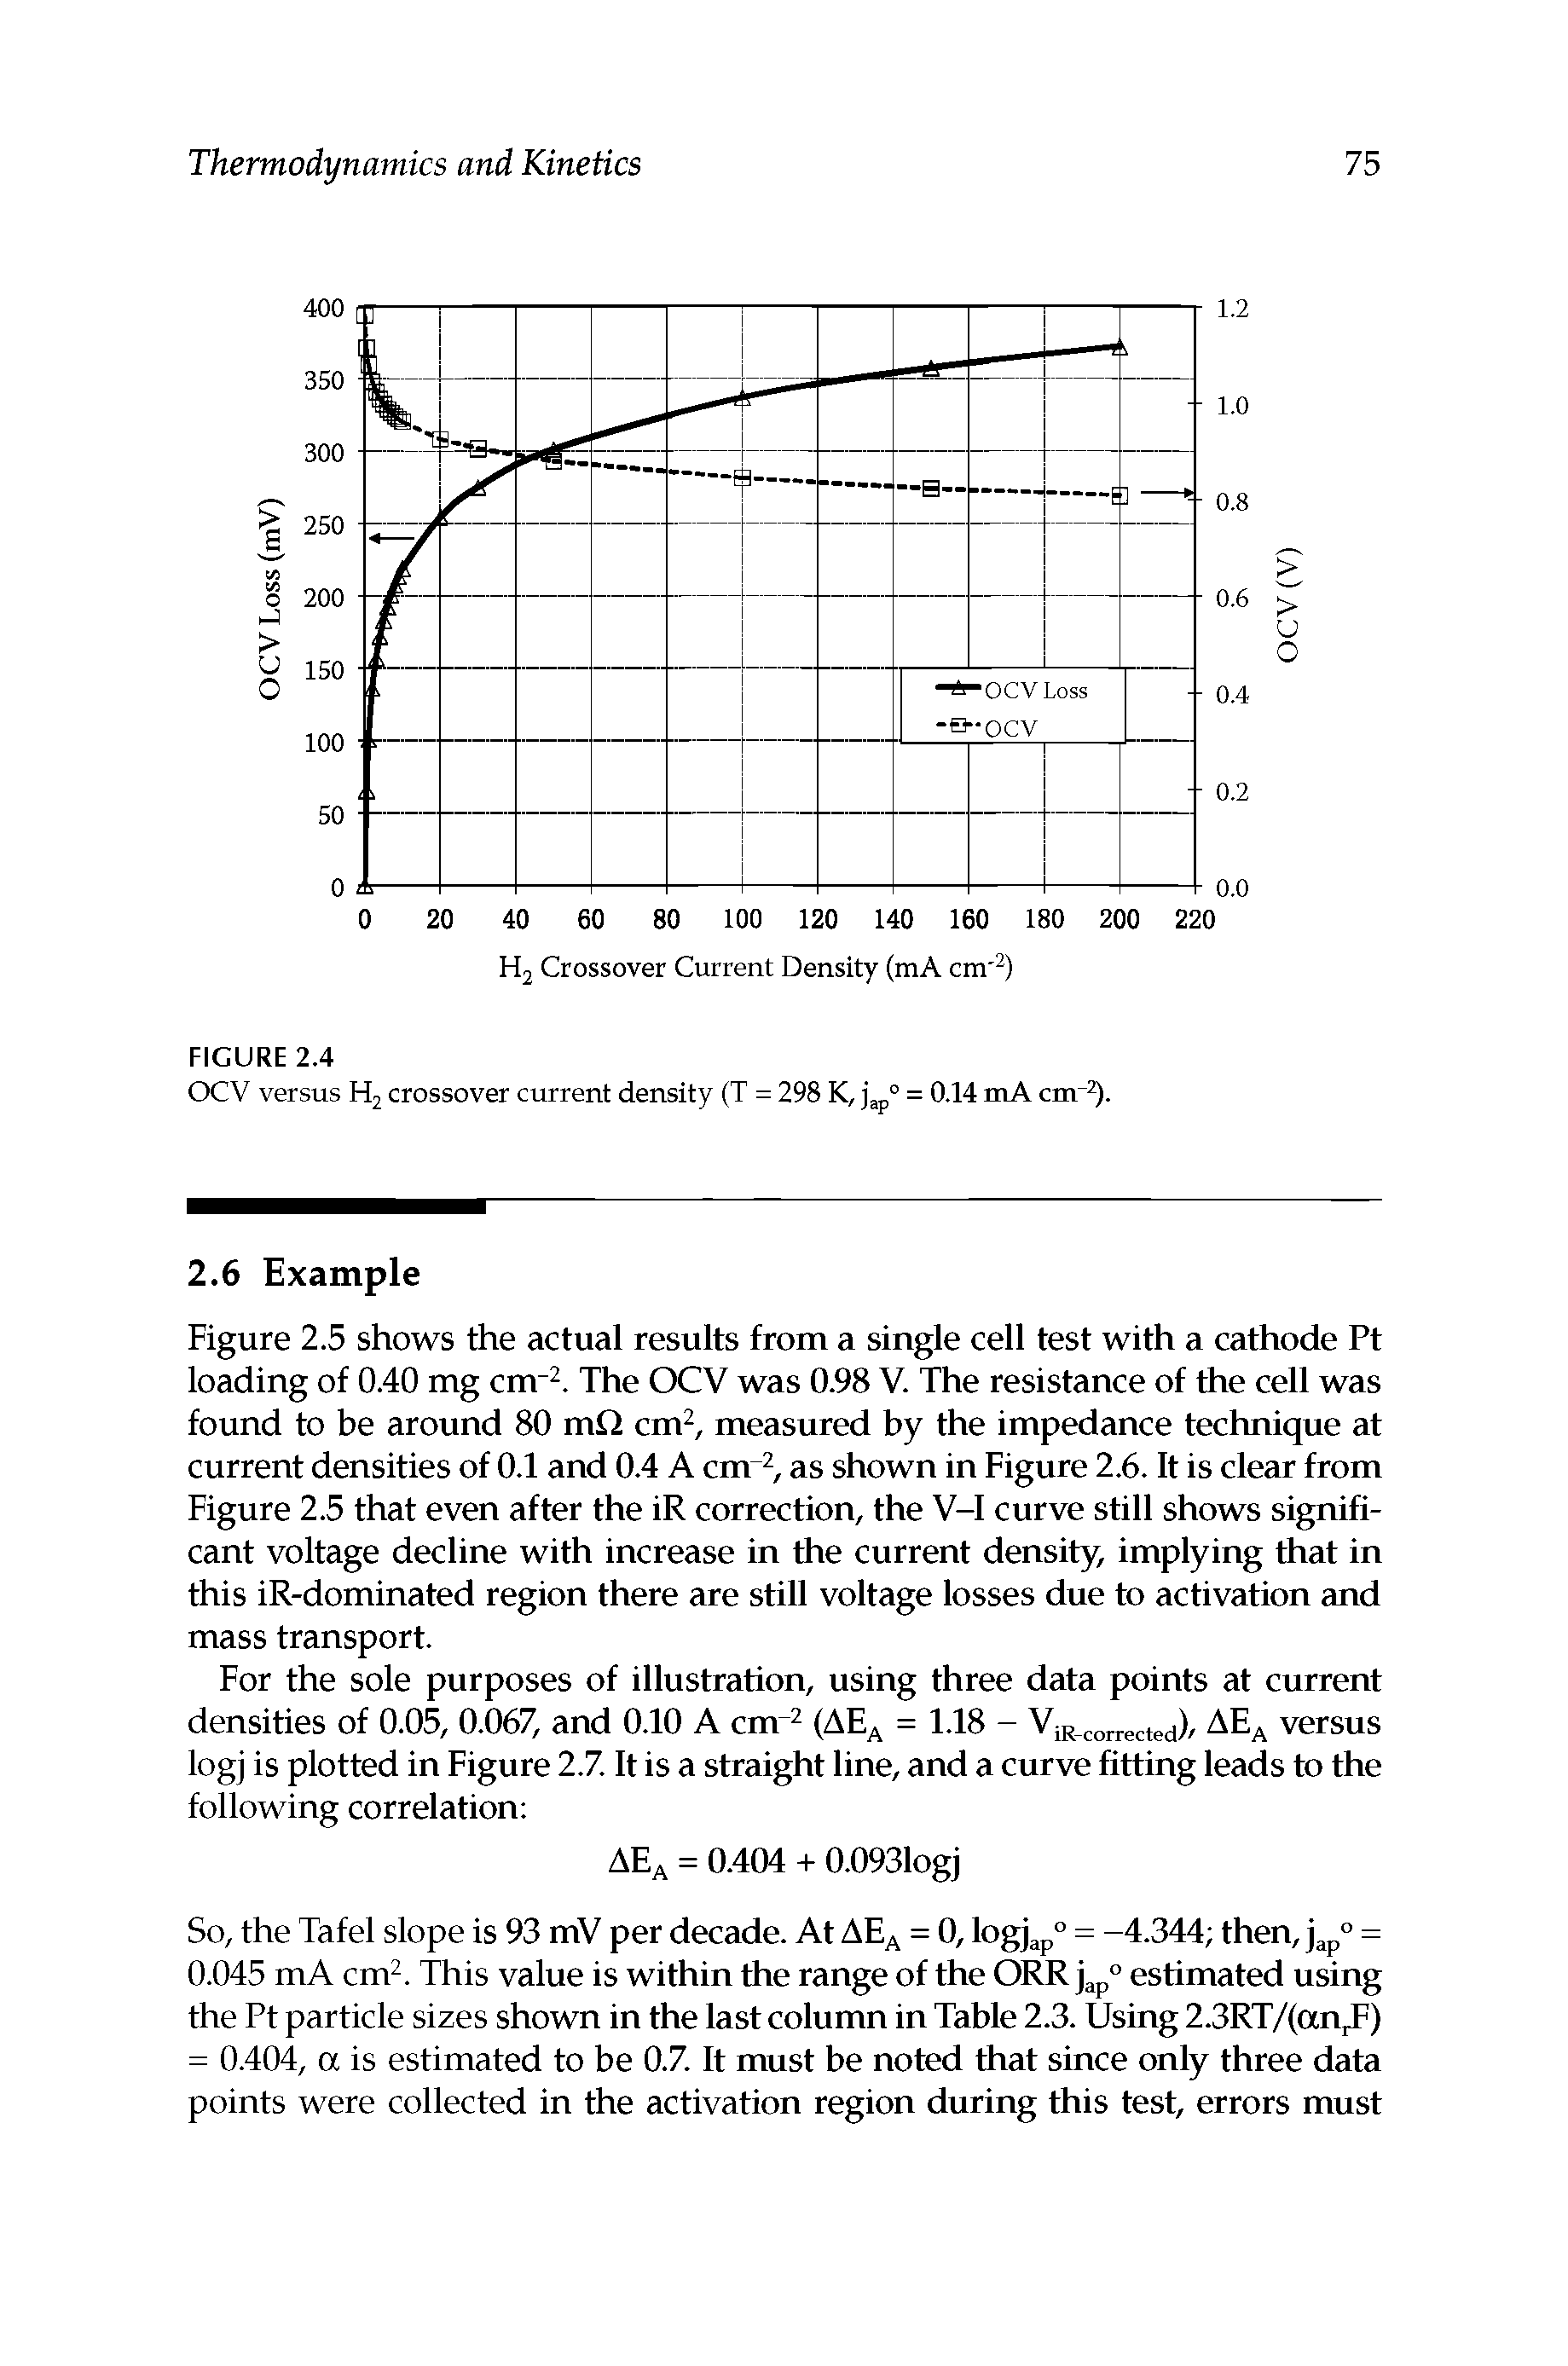 Figure 2.5 shows the actual results from a single cell test with a cathode Ft loading of 0.40 mg cm". The OCV was 0.98 V. The resistance of the cell was found to be around 80 mQ cm, measured by the impedance technique at current densities of 0.1 and 0.4 A cm , as shown in Figure 2.6. It is clear from Figure 2.5 that even after the iR correction, the V-1 curve still shows significant voltage decline with increase in the current density, implying that in this iR-dominated region there are still voltage losses due to activation and mass transport.